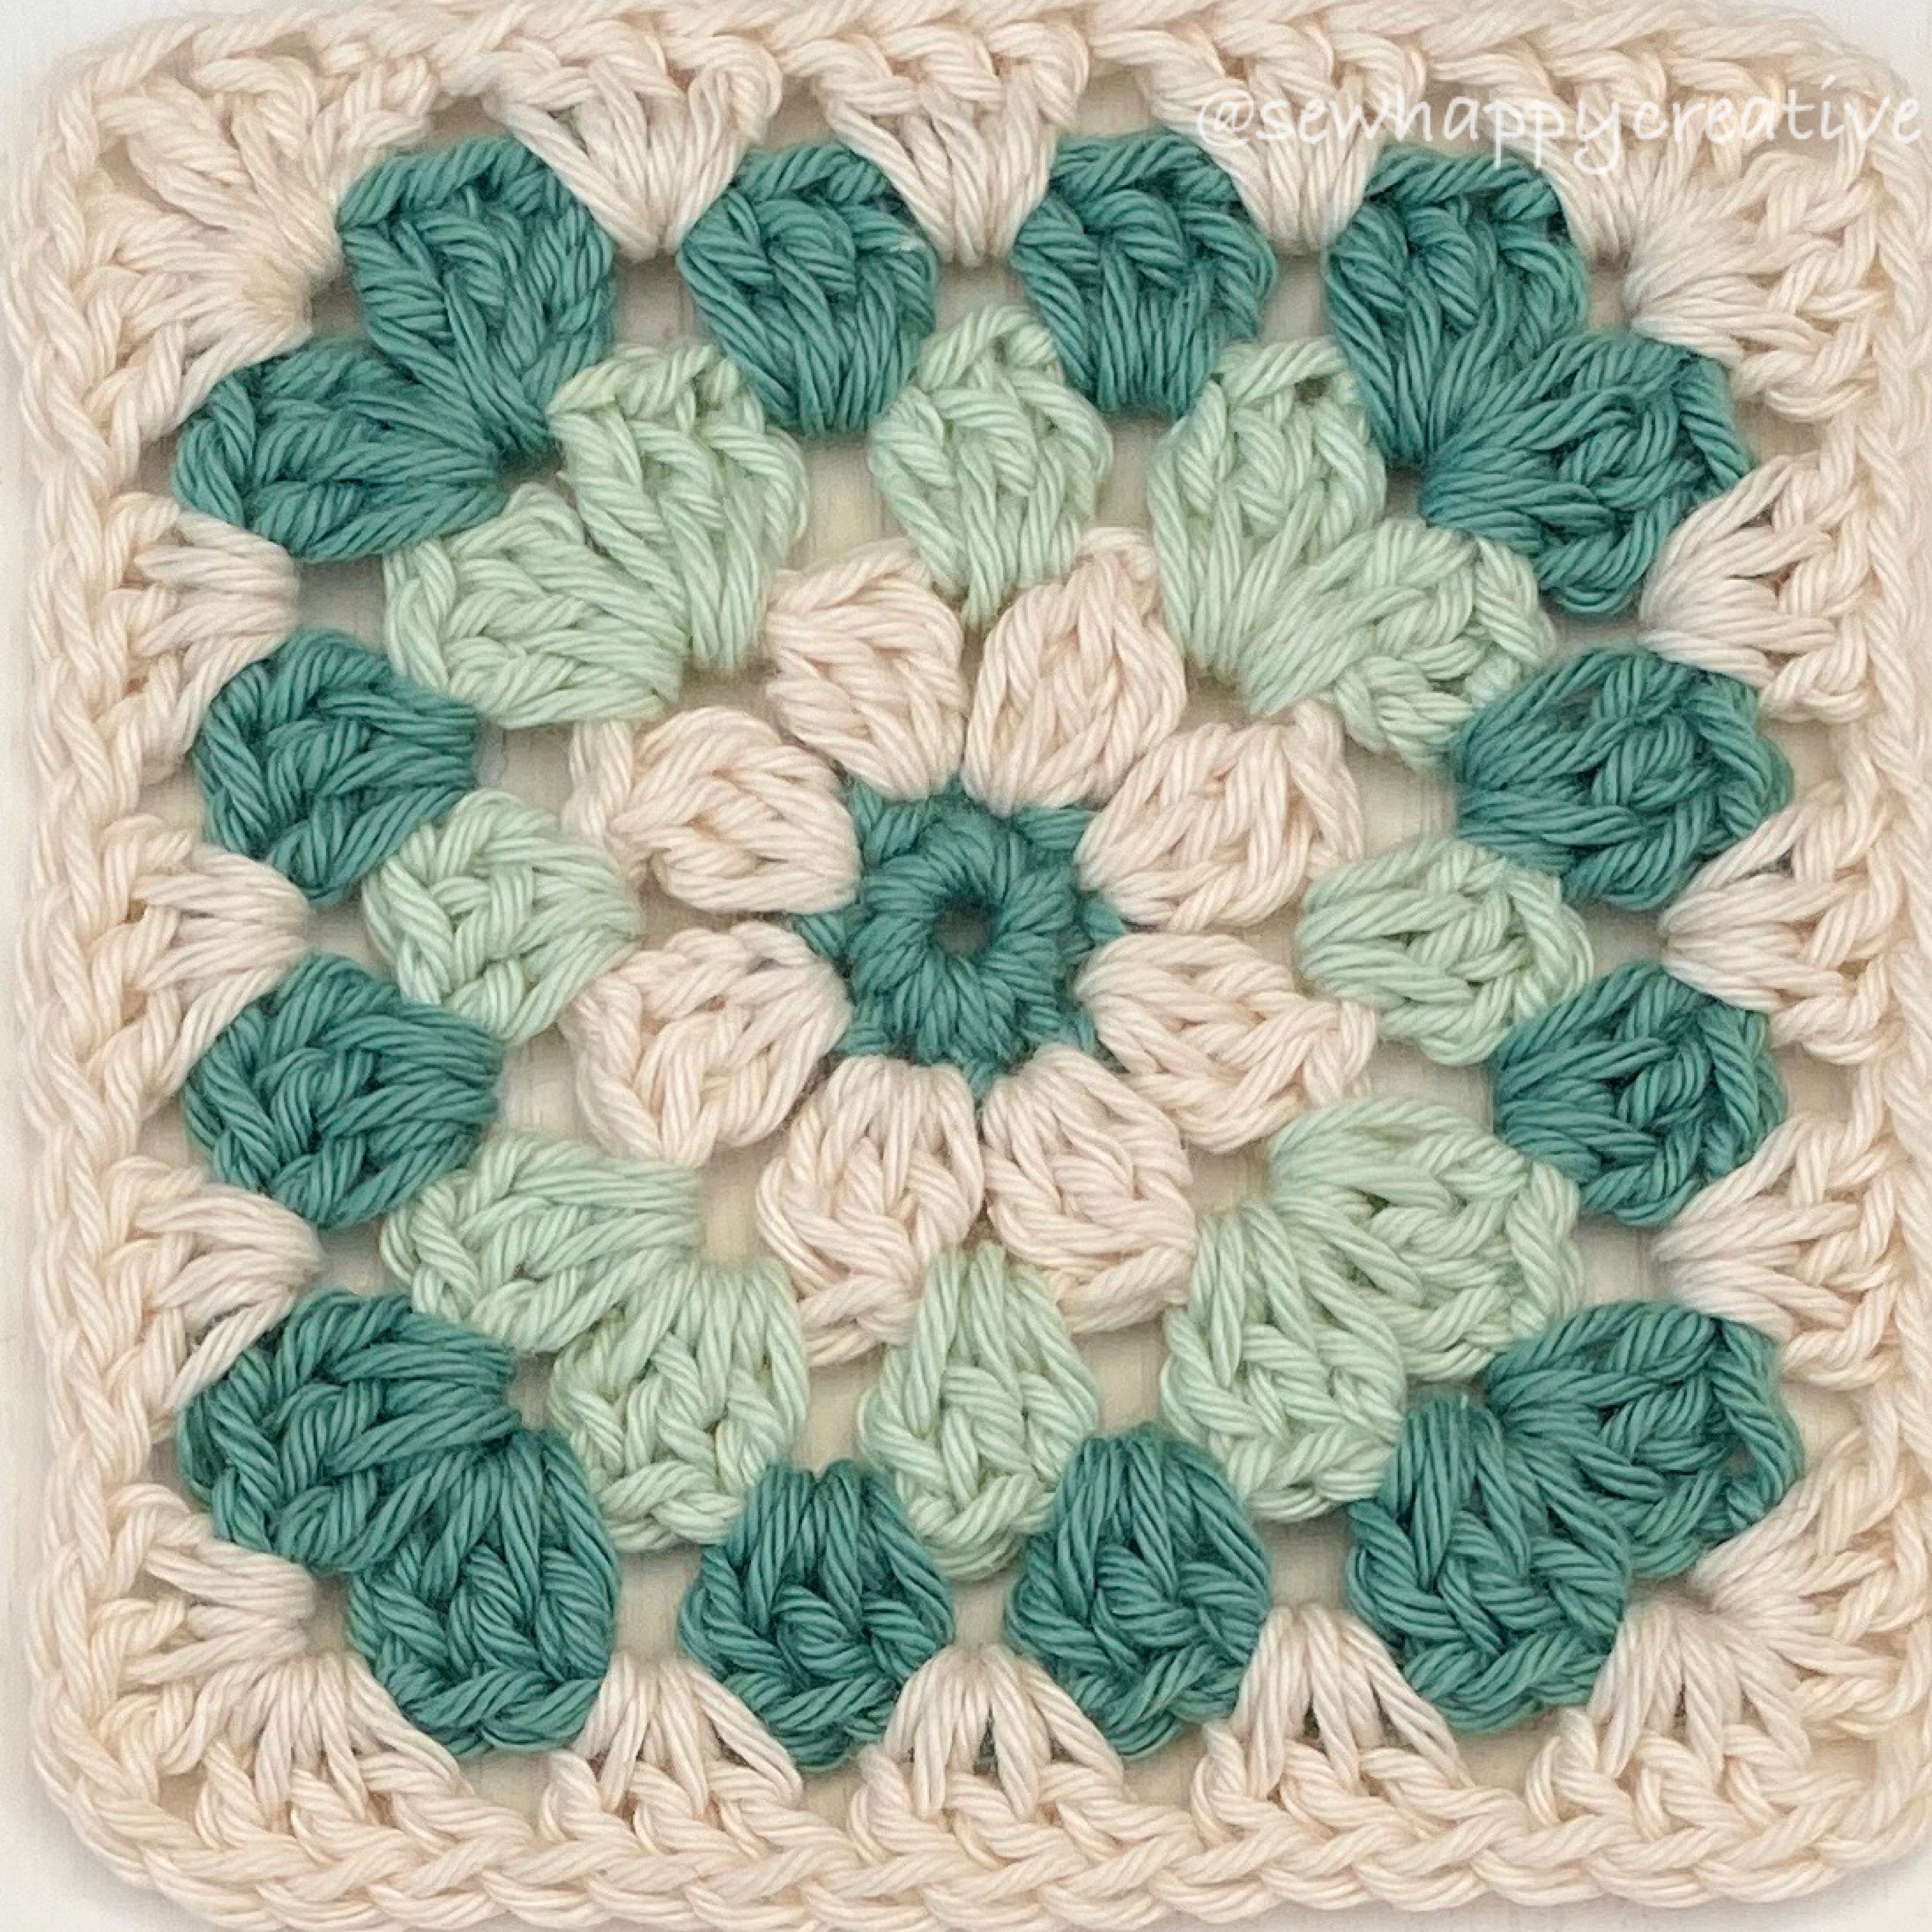 Crochet Book Review: 10 Granny Squares 30 Blankets. ⋆ Lazy Daisy